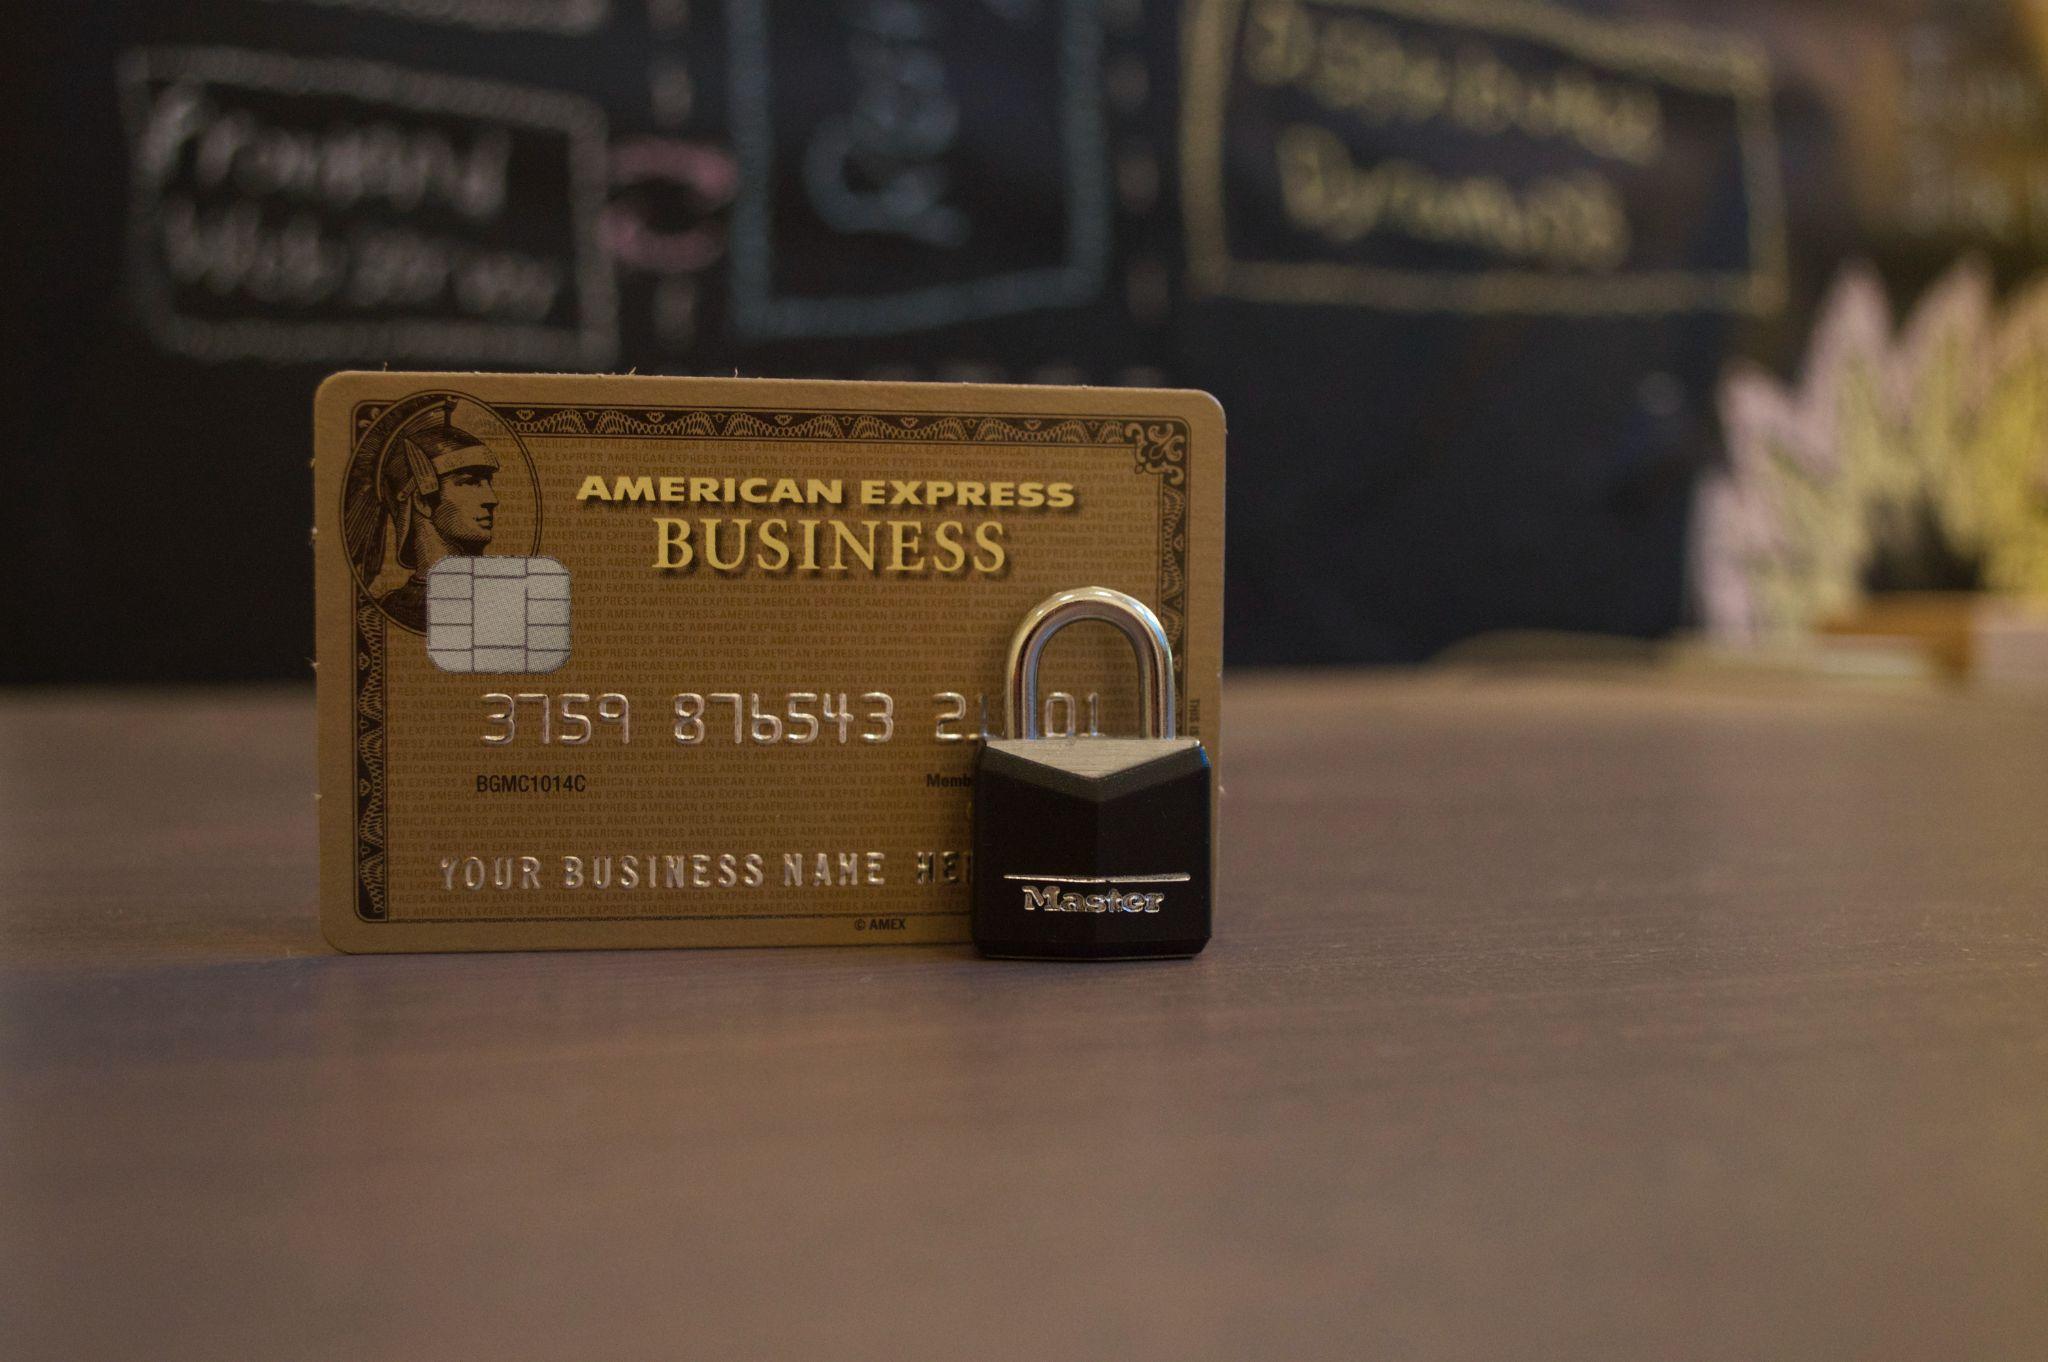 What do I need to get a business credit card